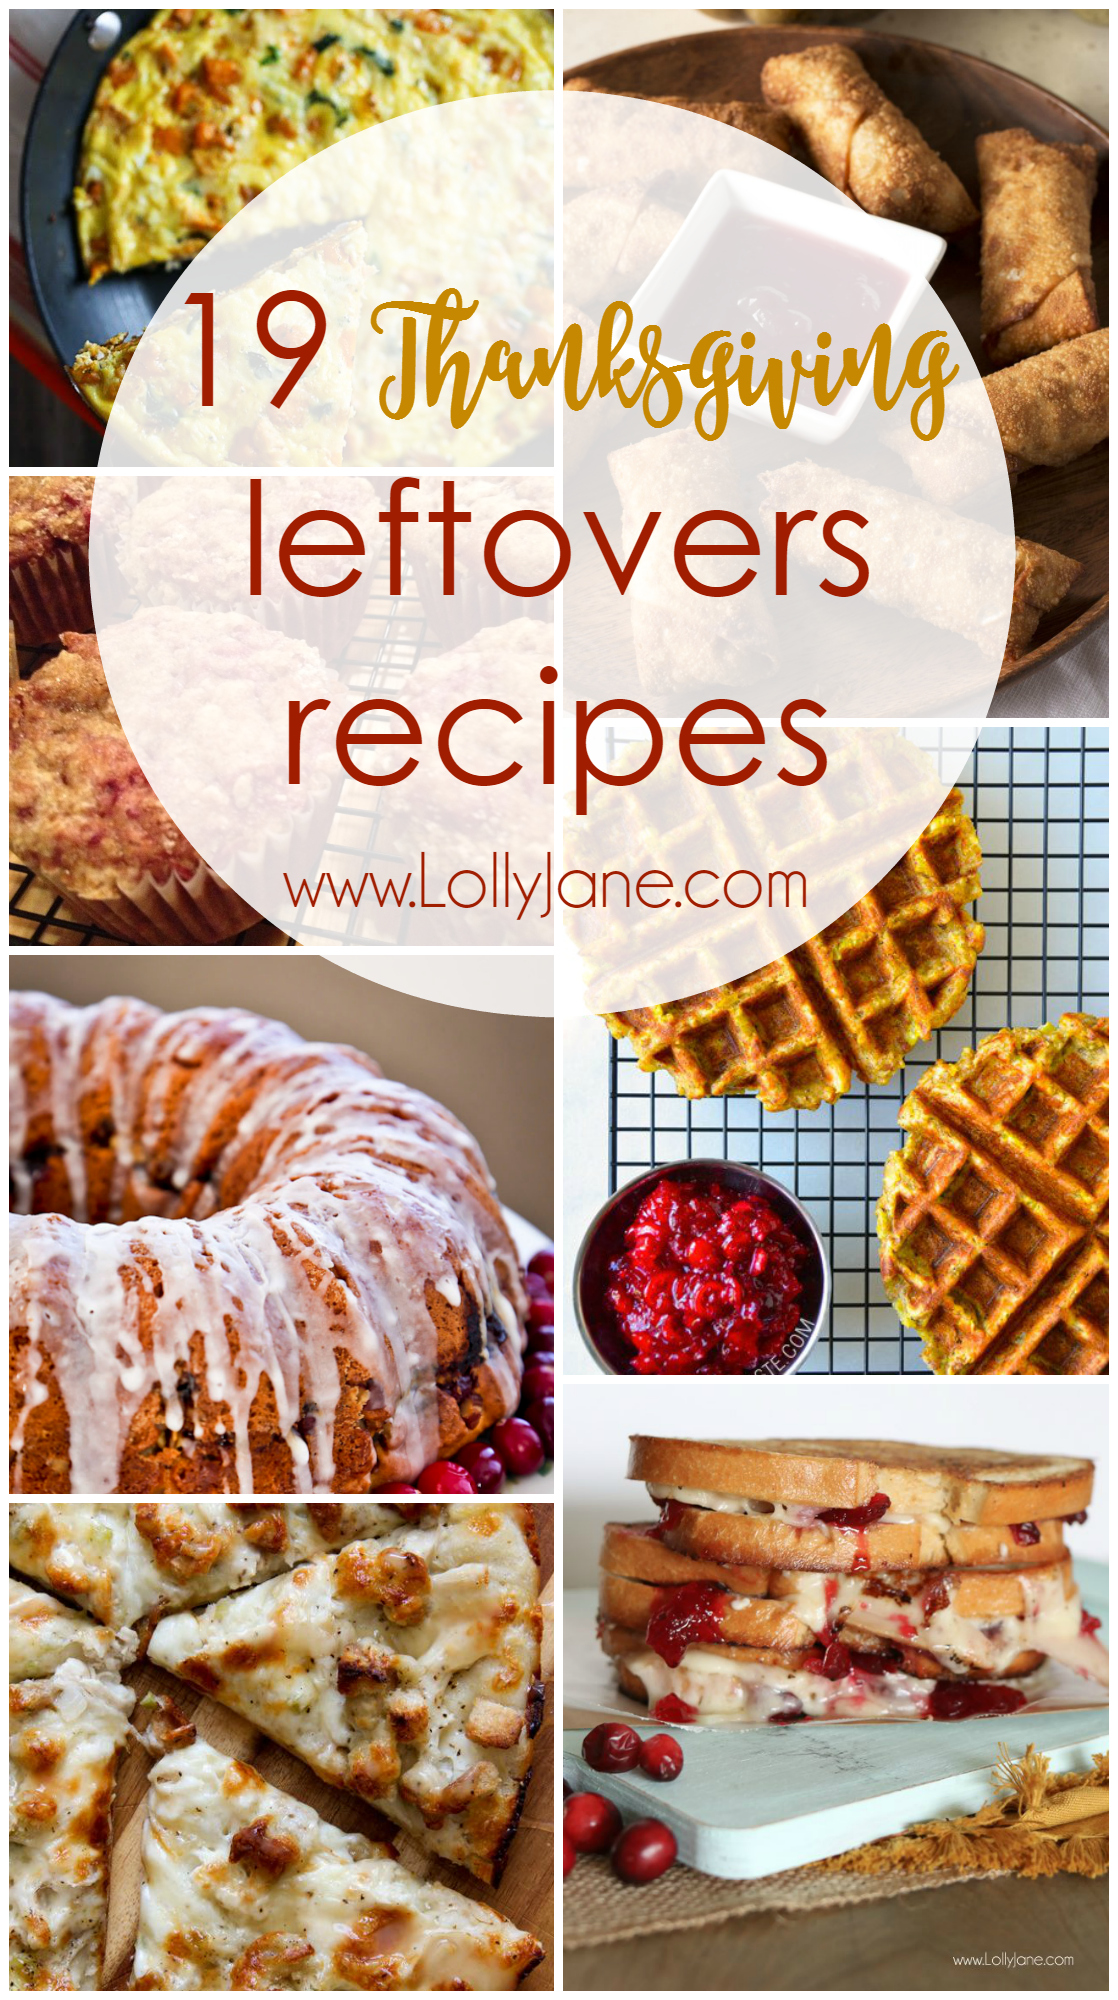 19 Thanksgiving Leftover Recipes | Lolly Jane